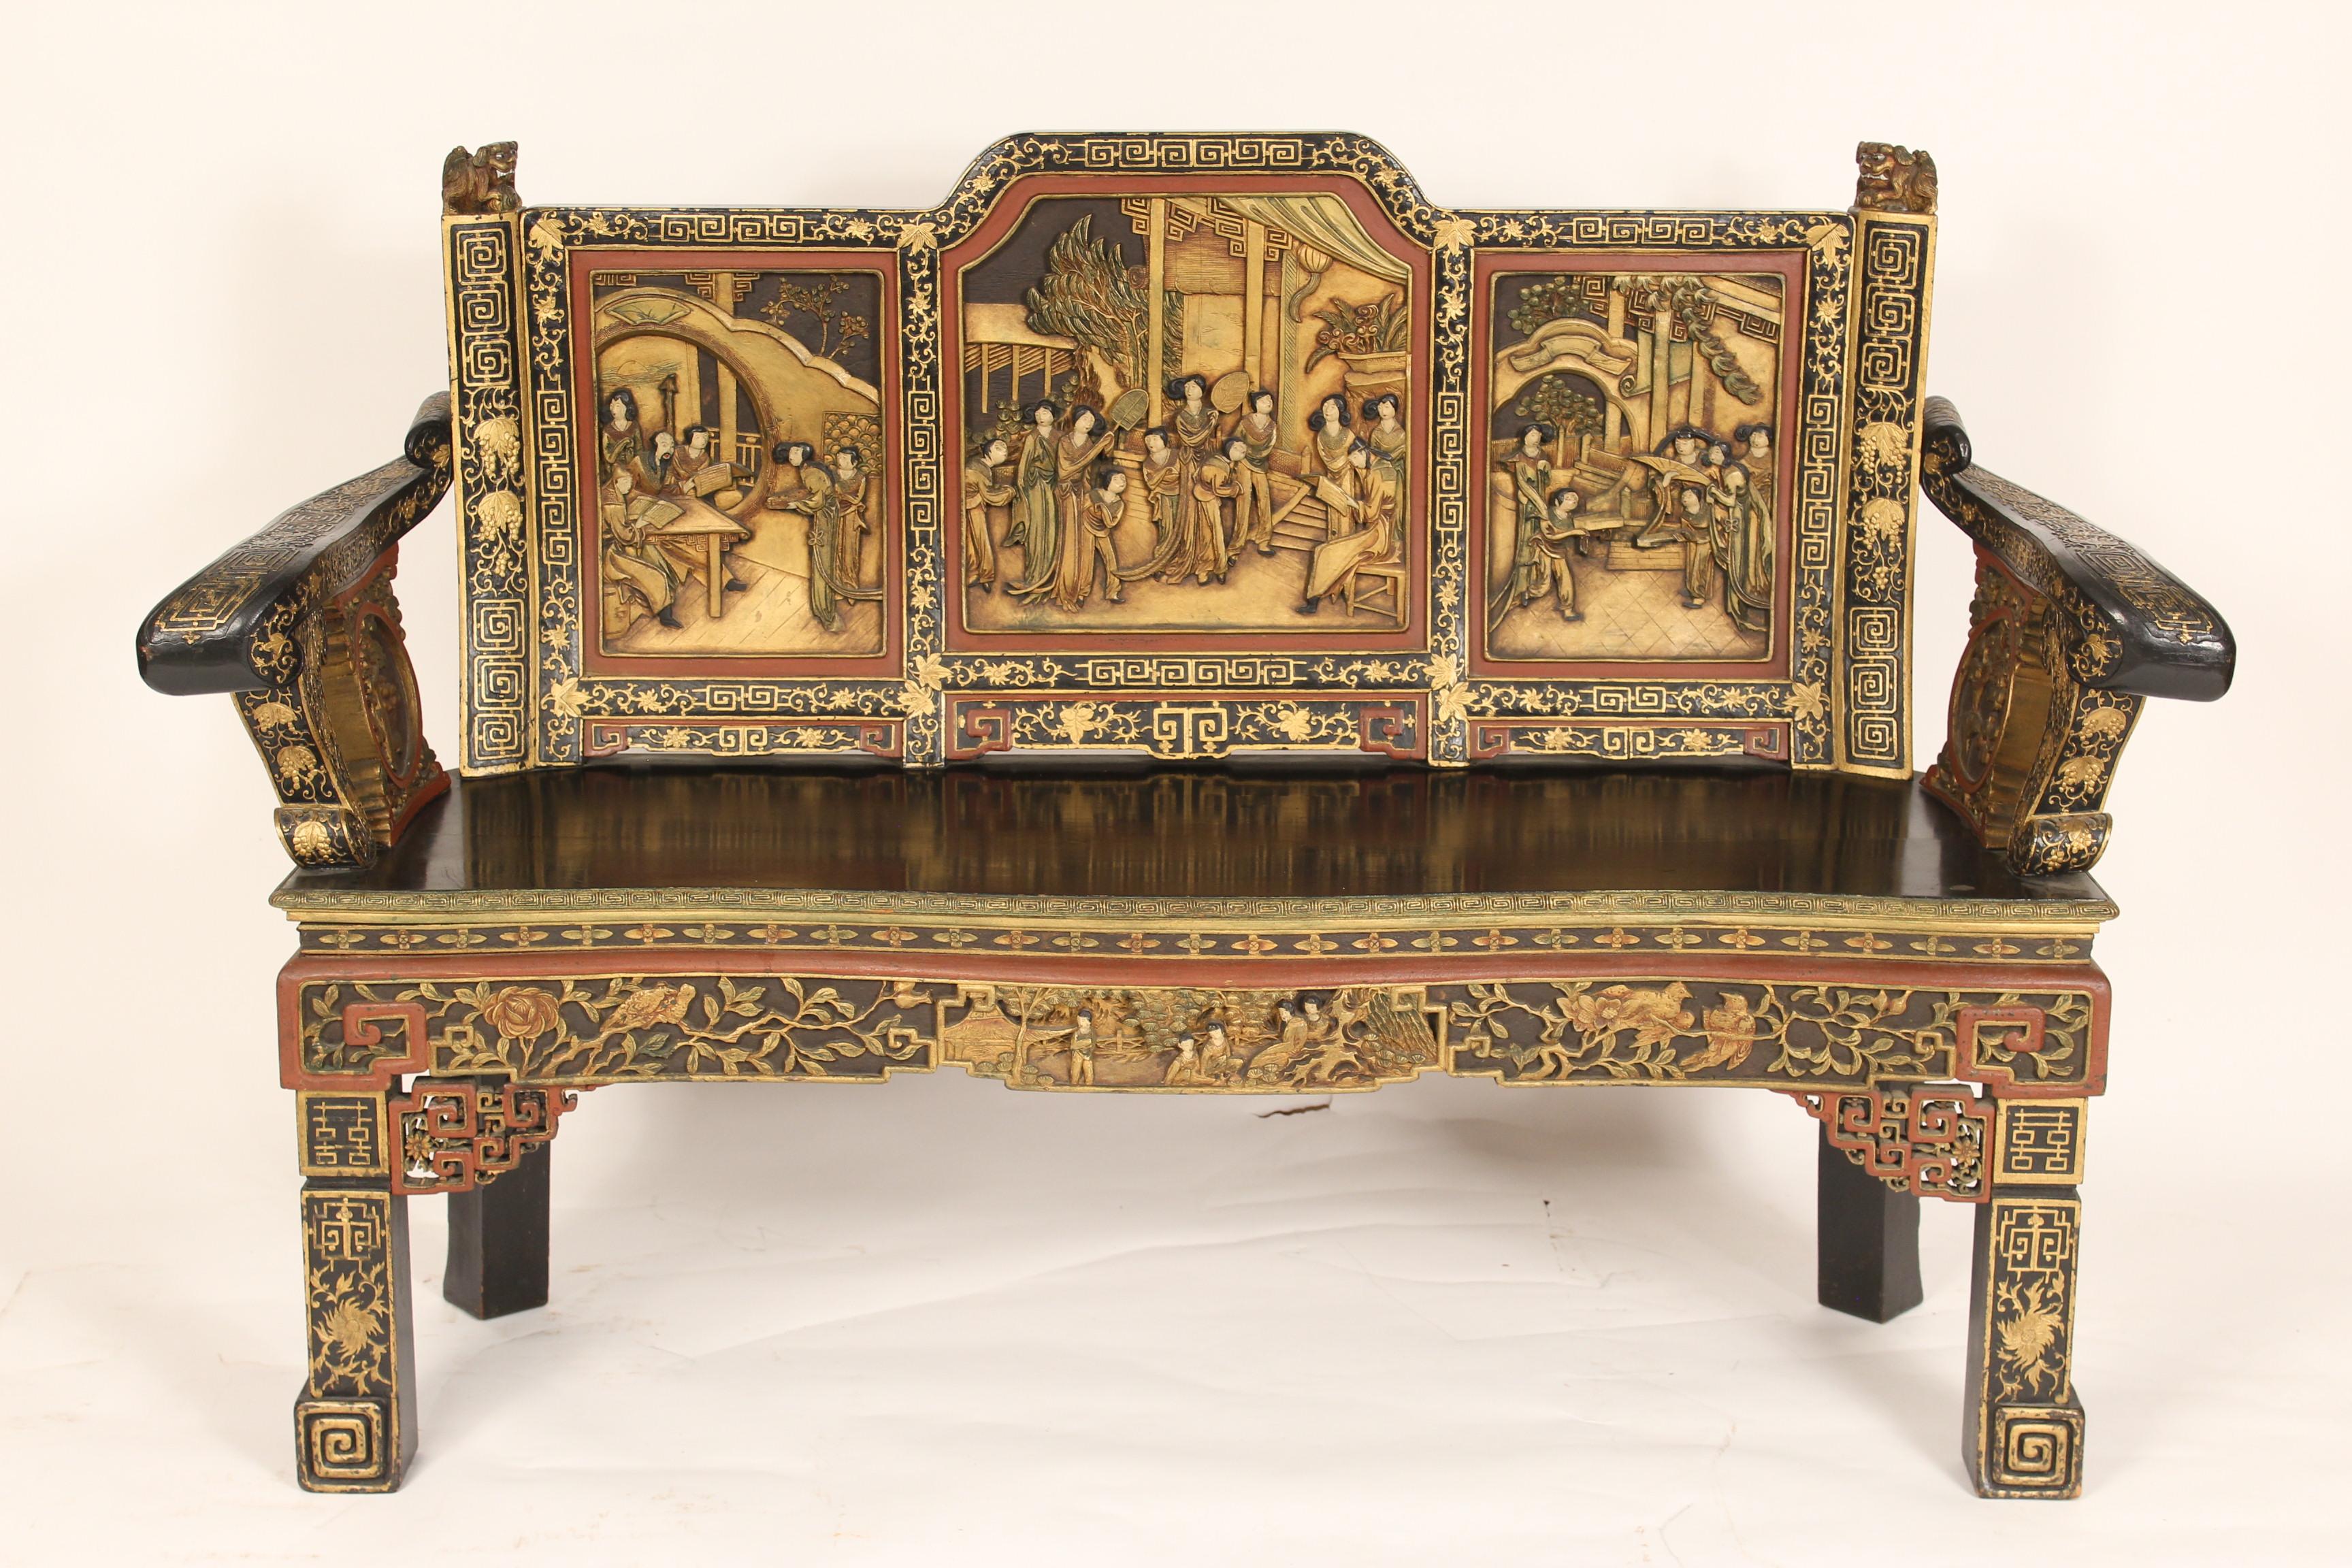 Chinese figural carved, painted and gilt decorated bench, mid 20th century.